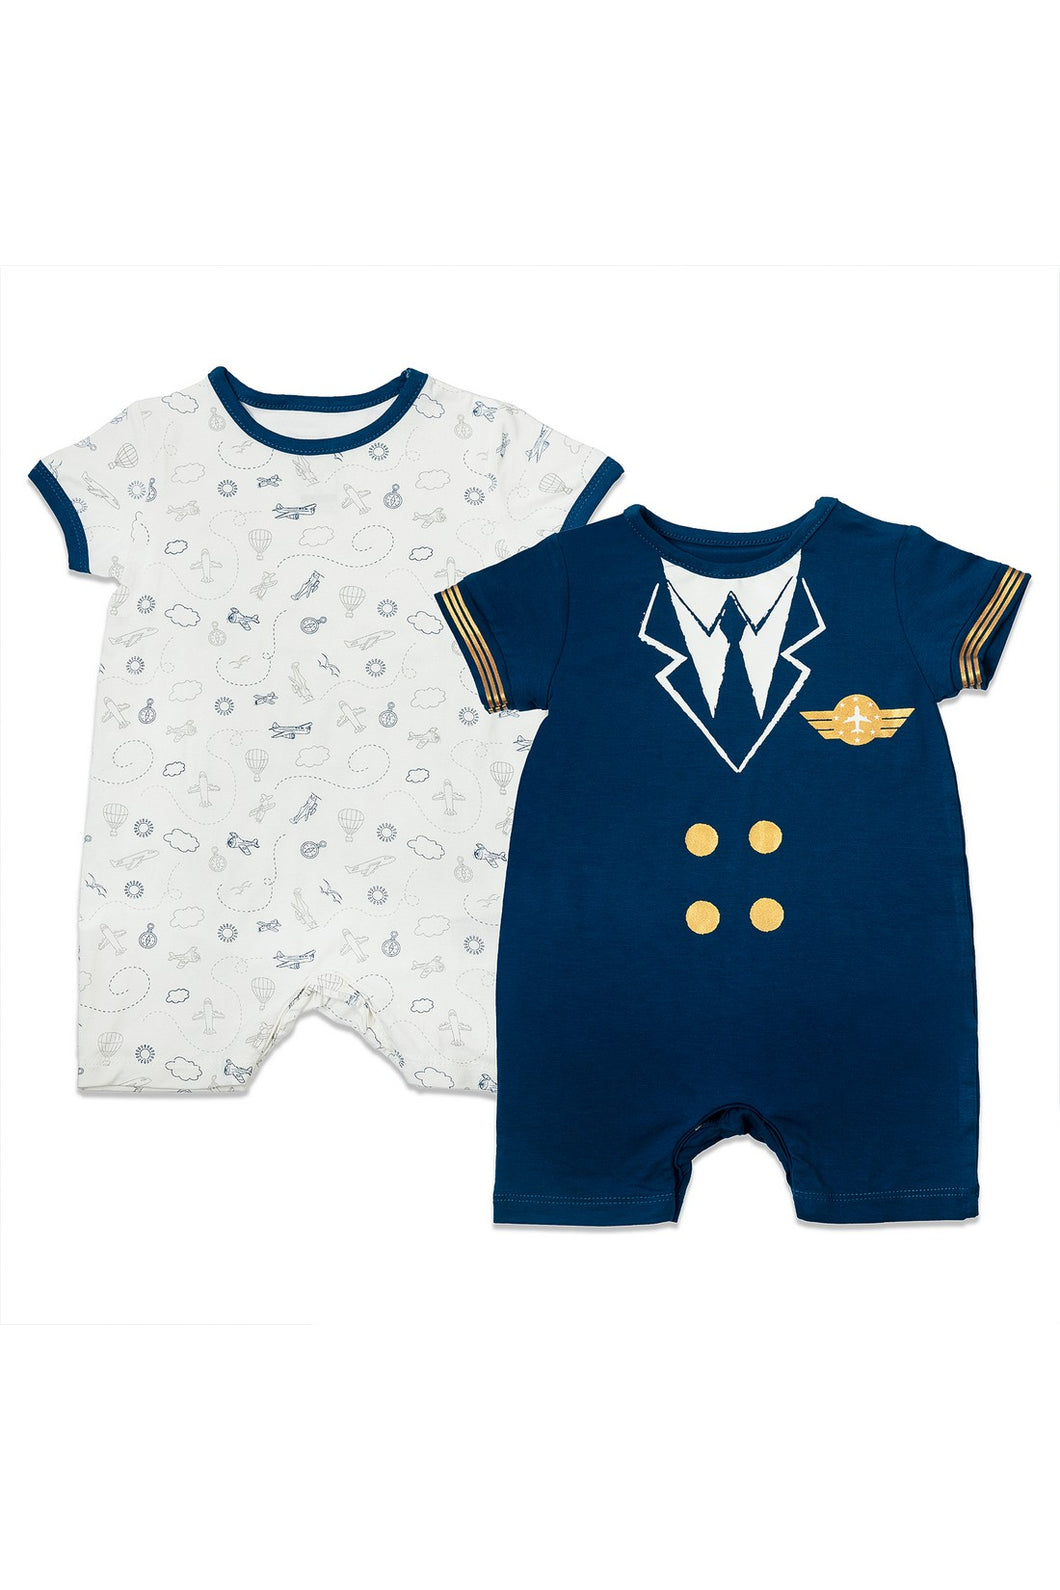 Not Too Big Bamboo Rompers Pilot - 2 Pack